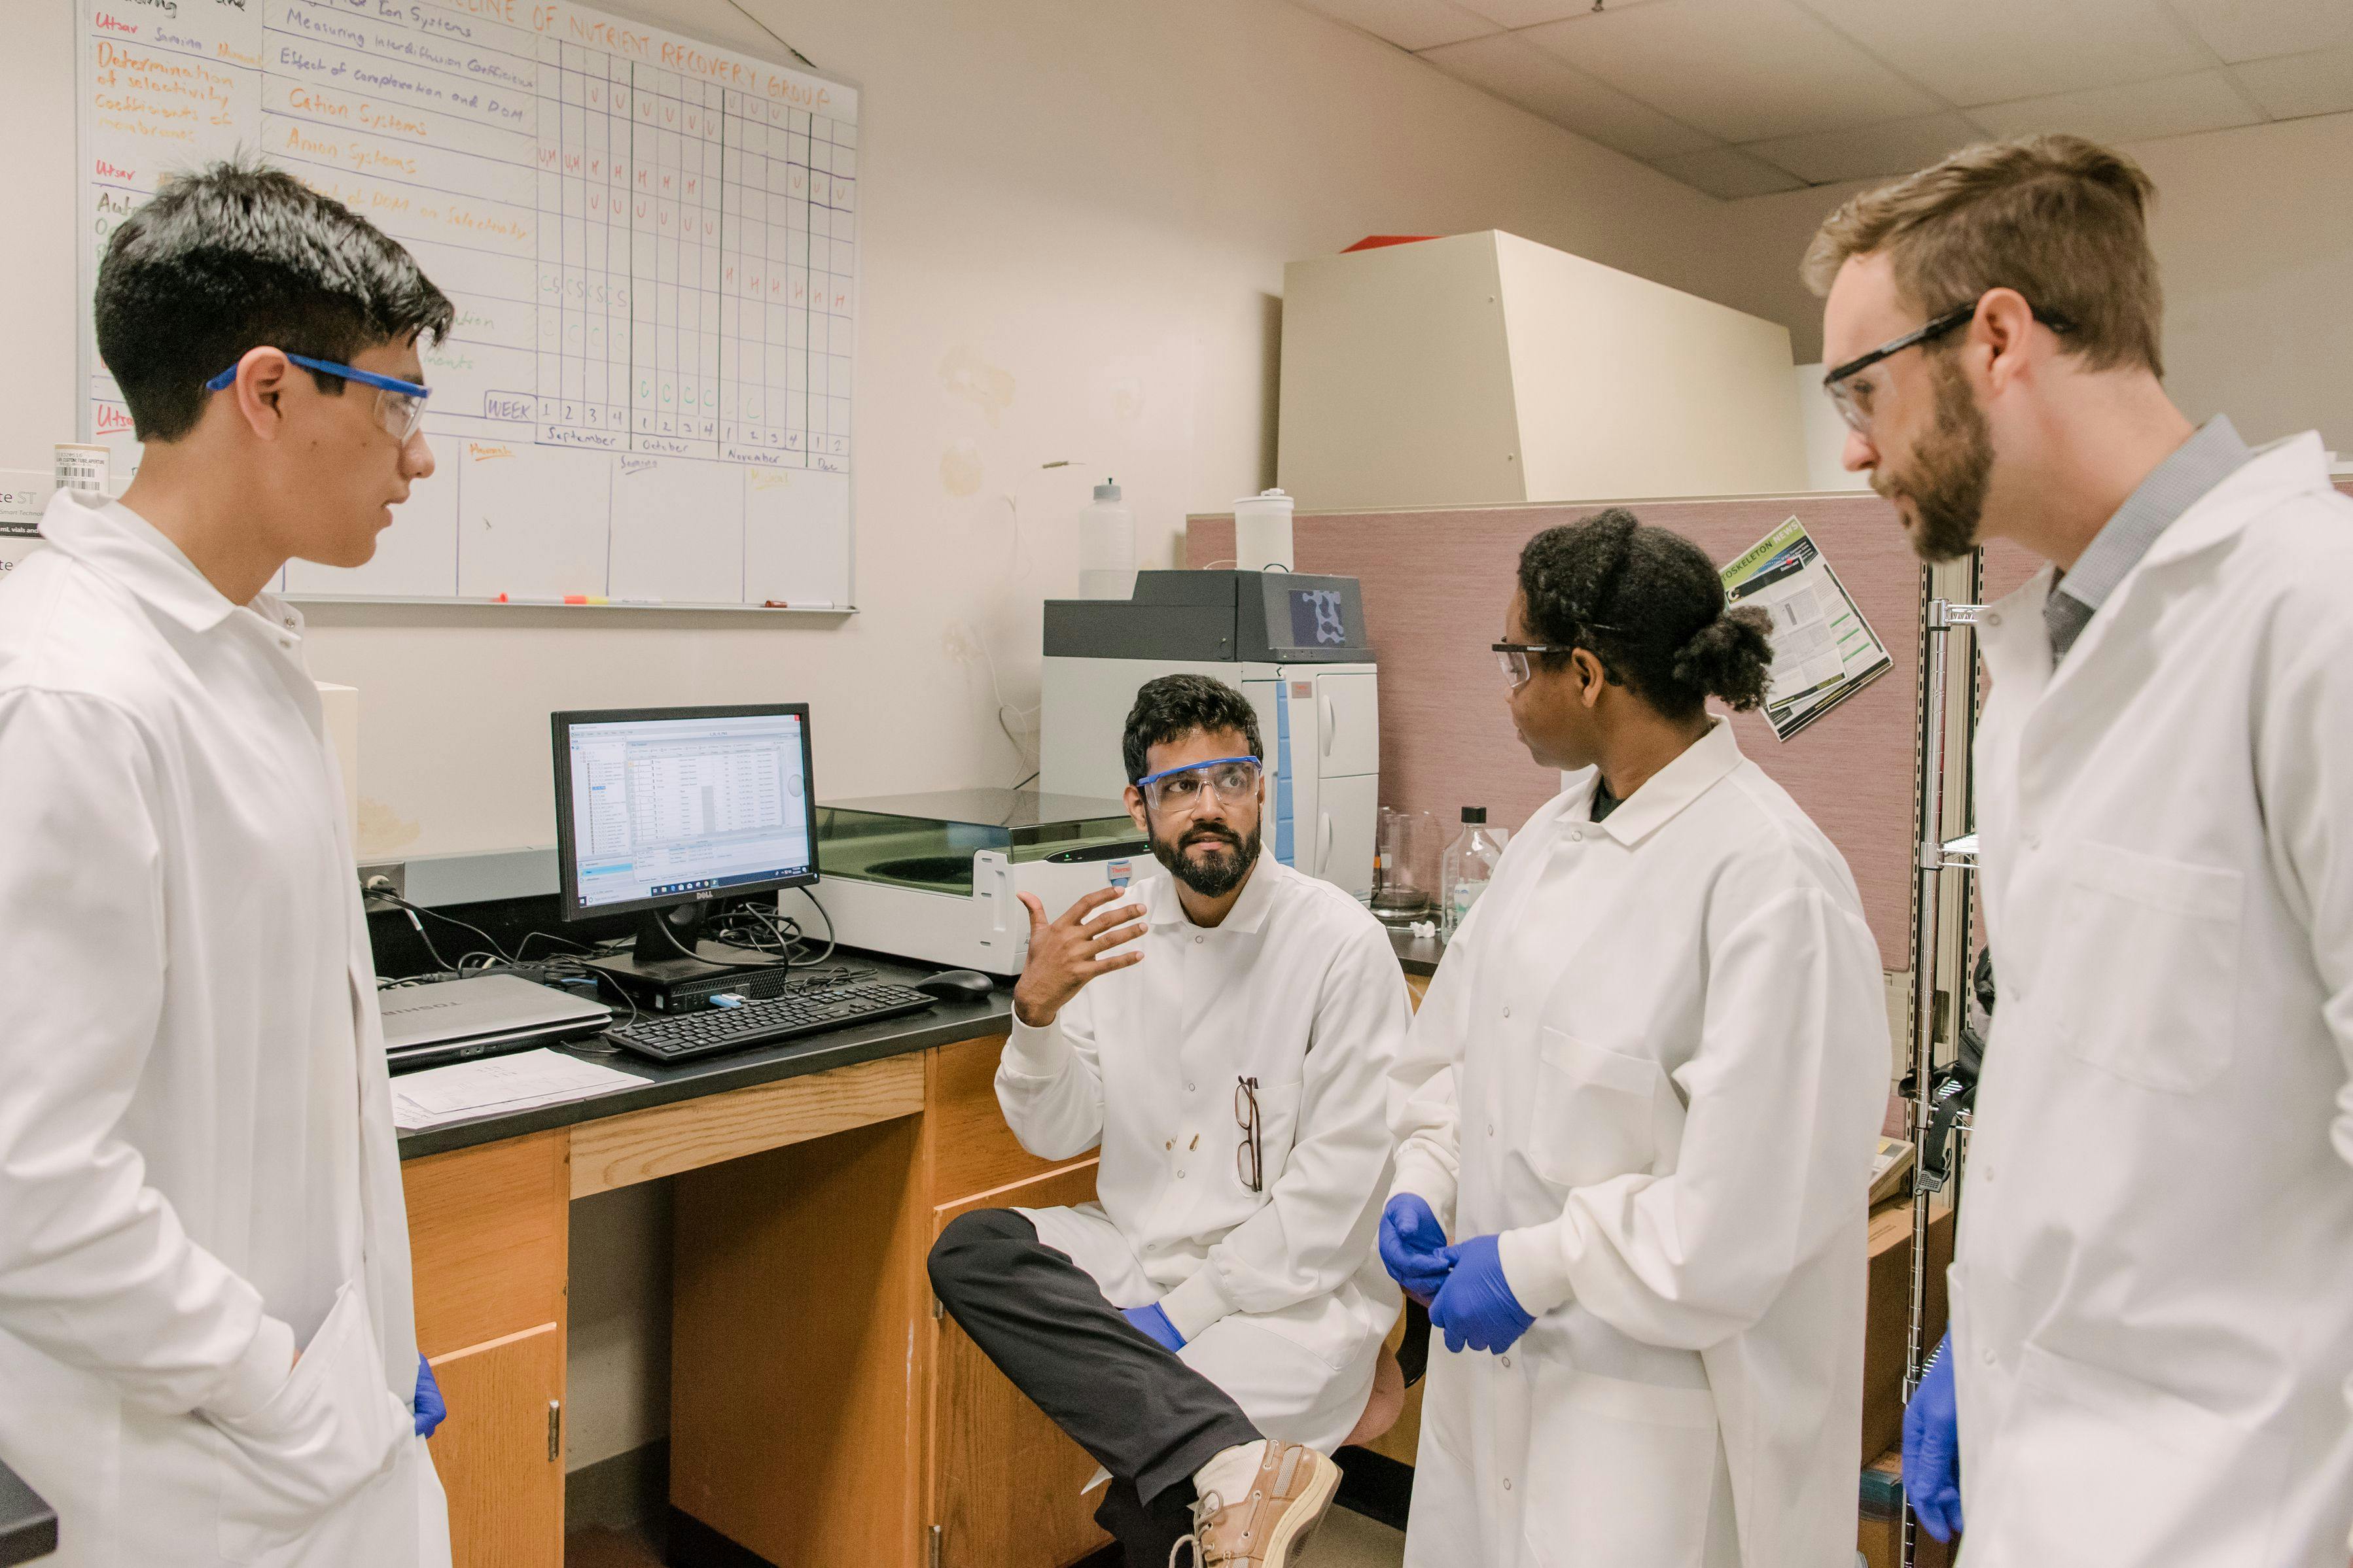 Blaney (right) with undergraduate researchers Fabian Amurrio (left) and Lauren Harris (second from right) and PhD candidate Utsav Shashvatt (second from left) discuss ion chromatography results related to a project focused on nutrient recovery from waste streams. | Photo Credit: © Lee Blaney